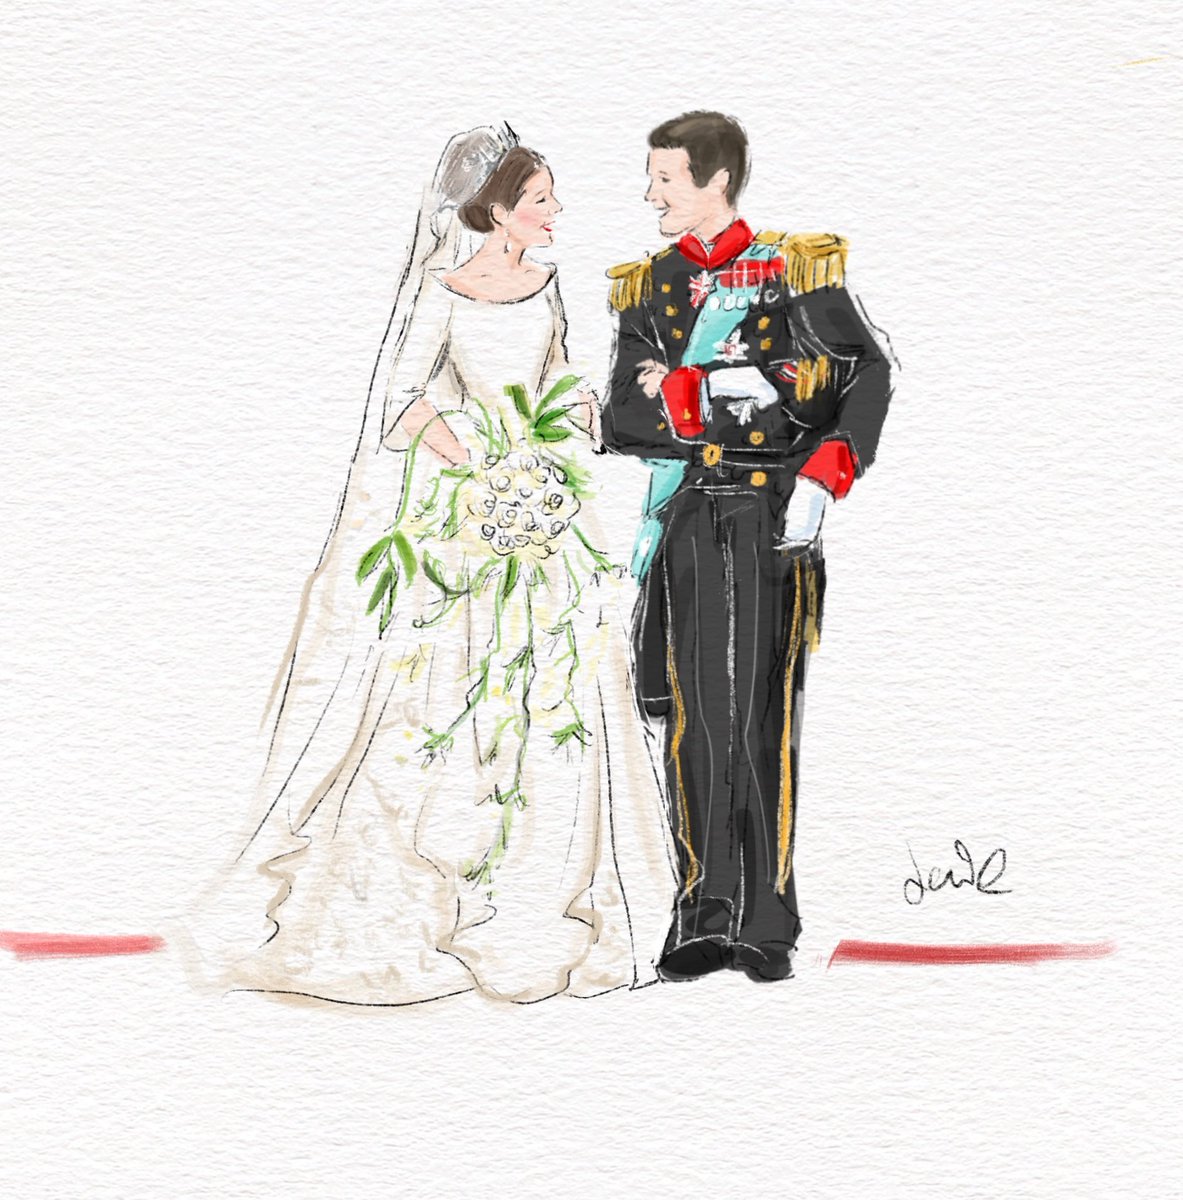 Drawing Queen Mary of Denmark and King Frederik on their wedding day 20 years ago